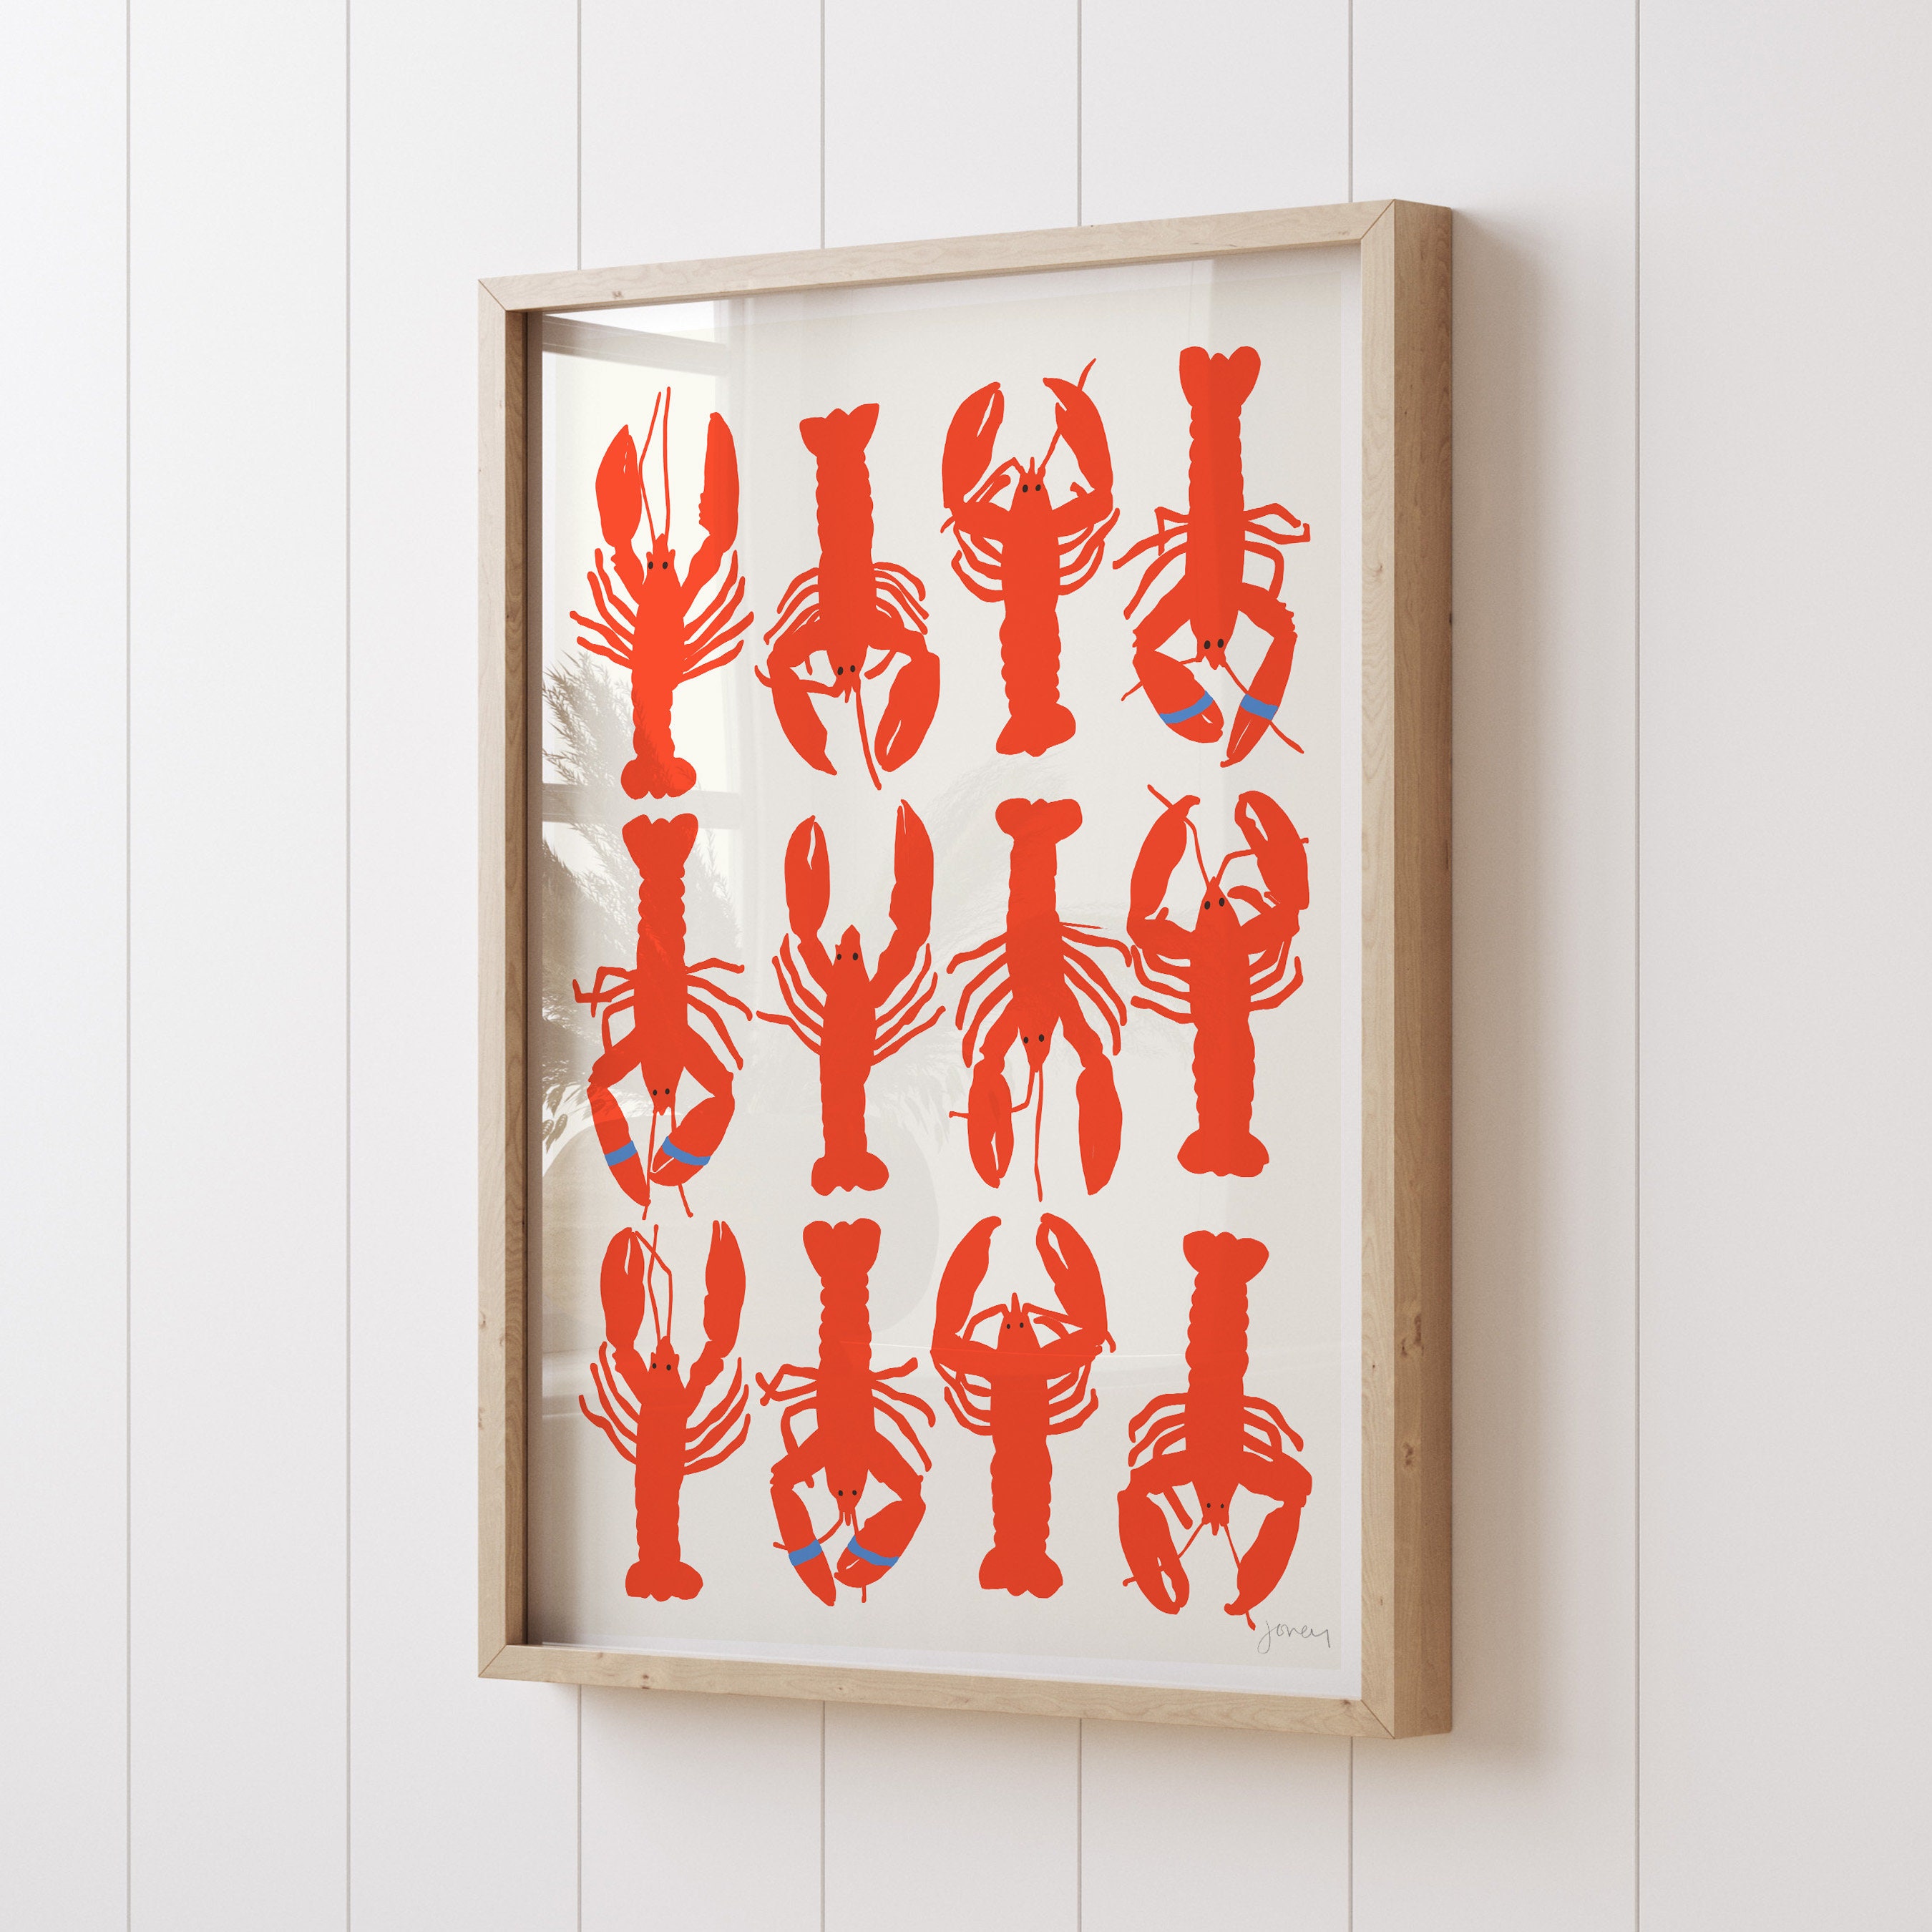 Lobster Pattern Art Print - Signed and Printed by the Artist - Unframed ...